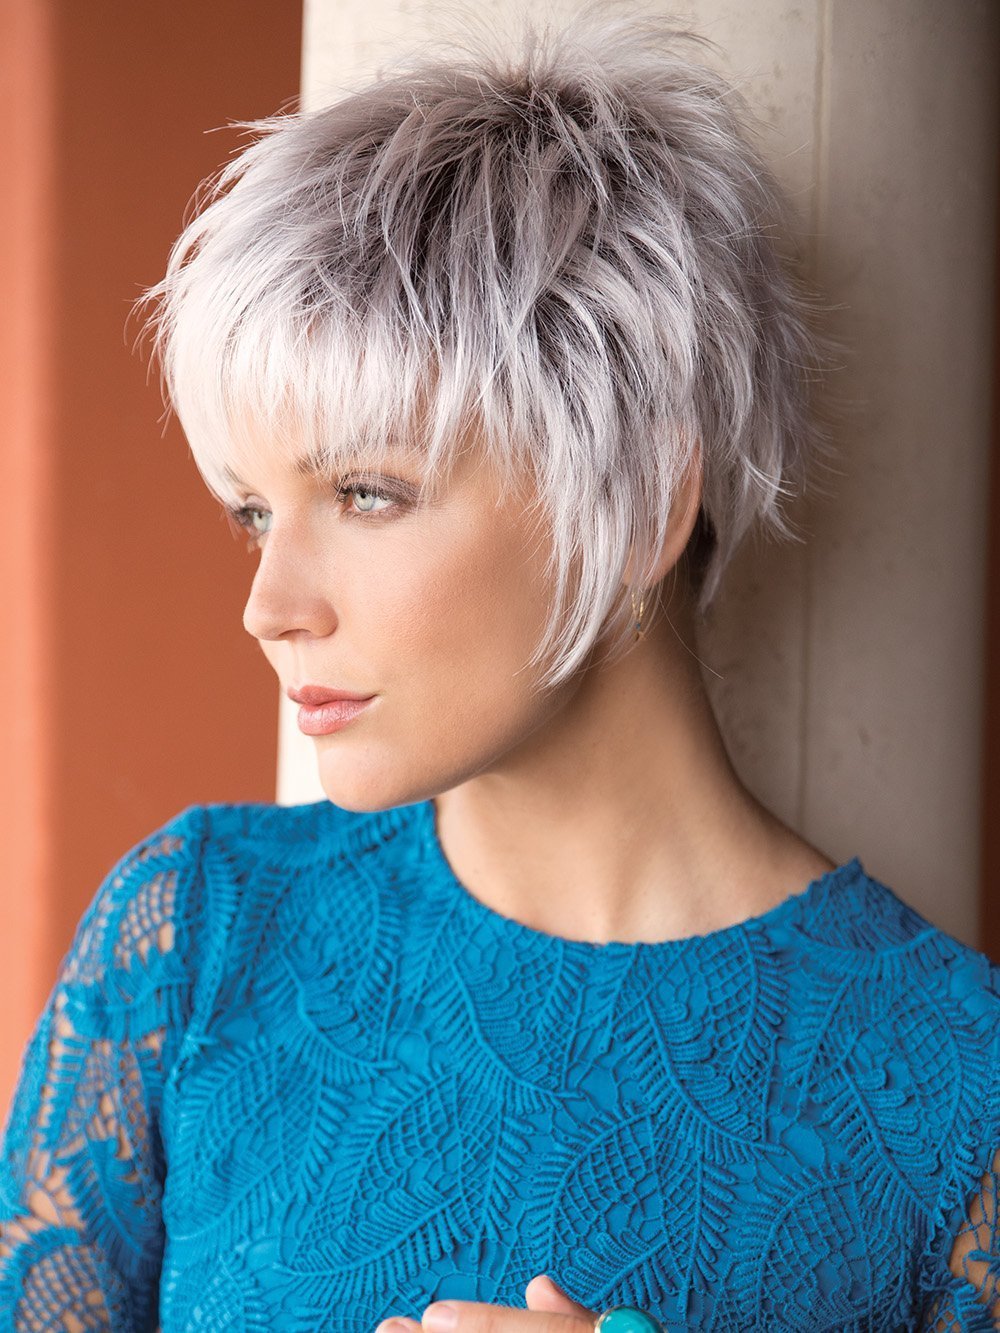 Billie by Noriko is a short pixie style wig.